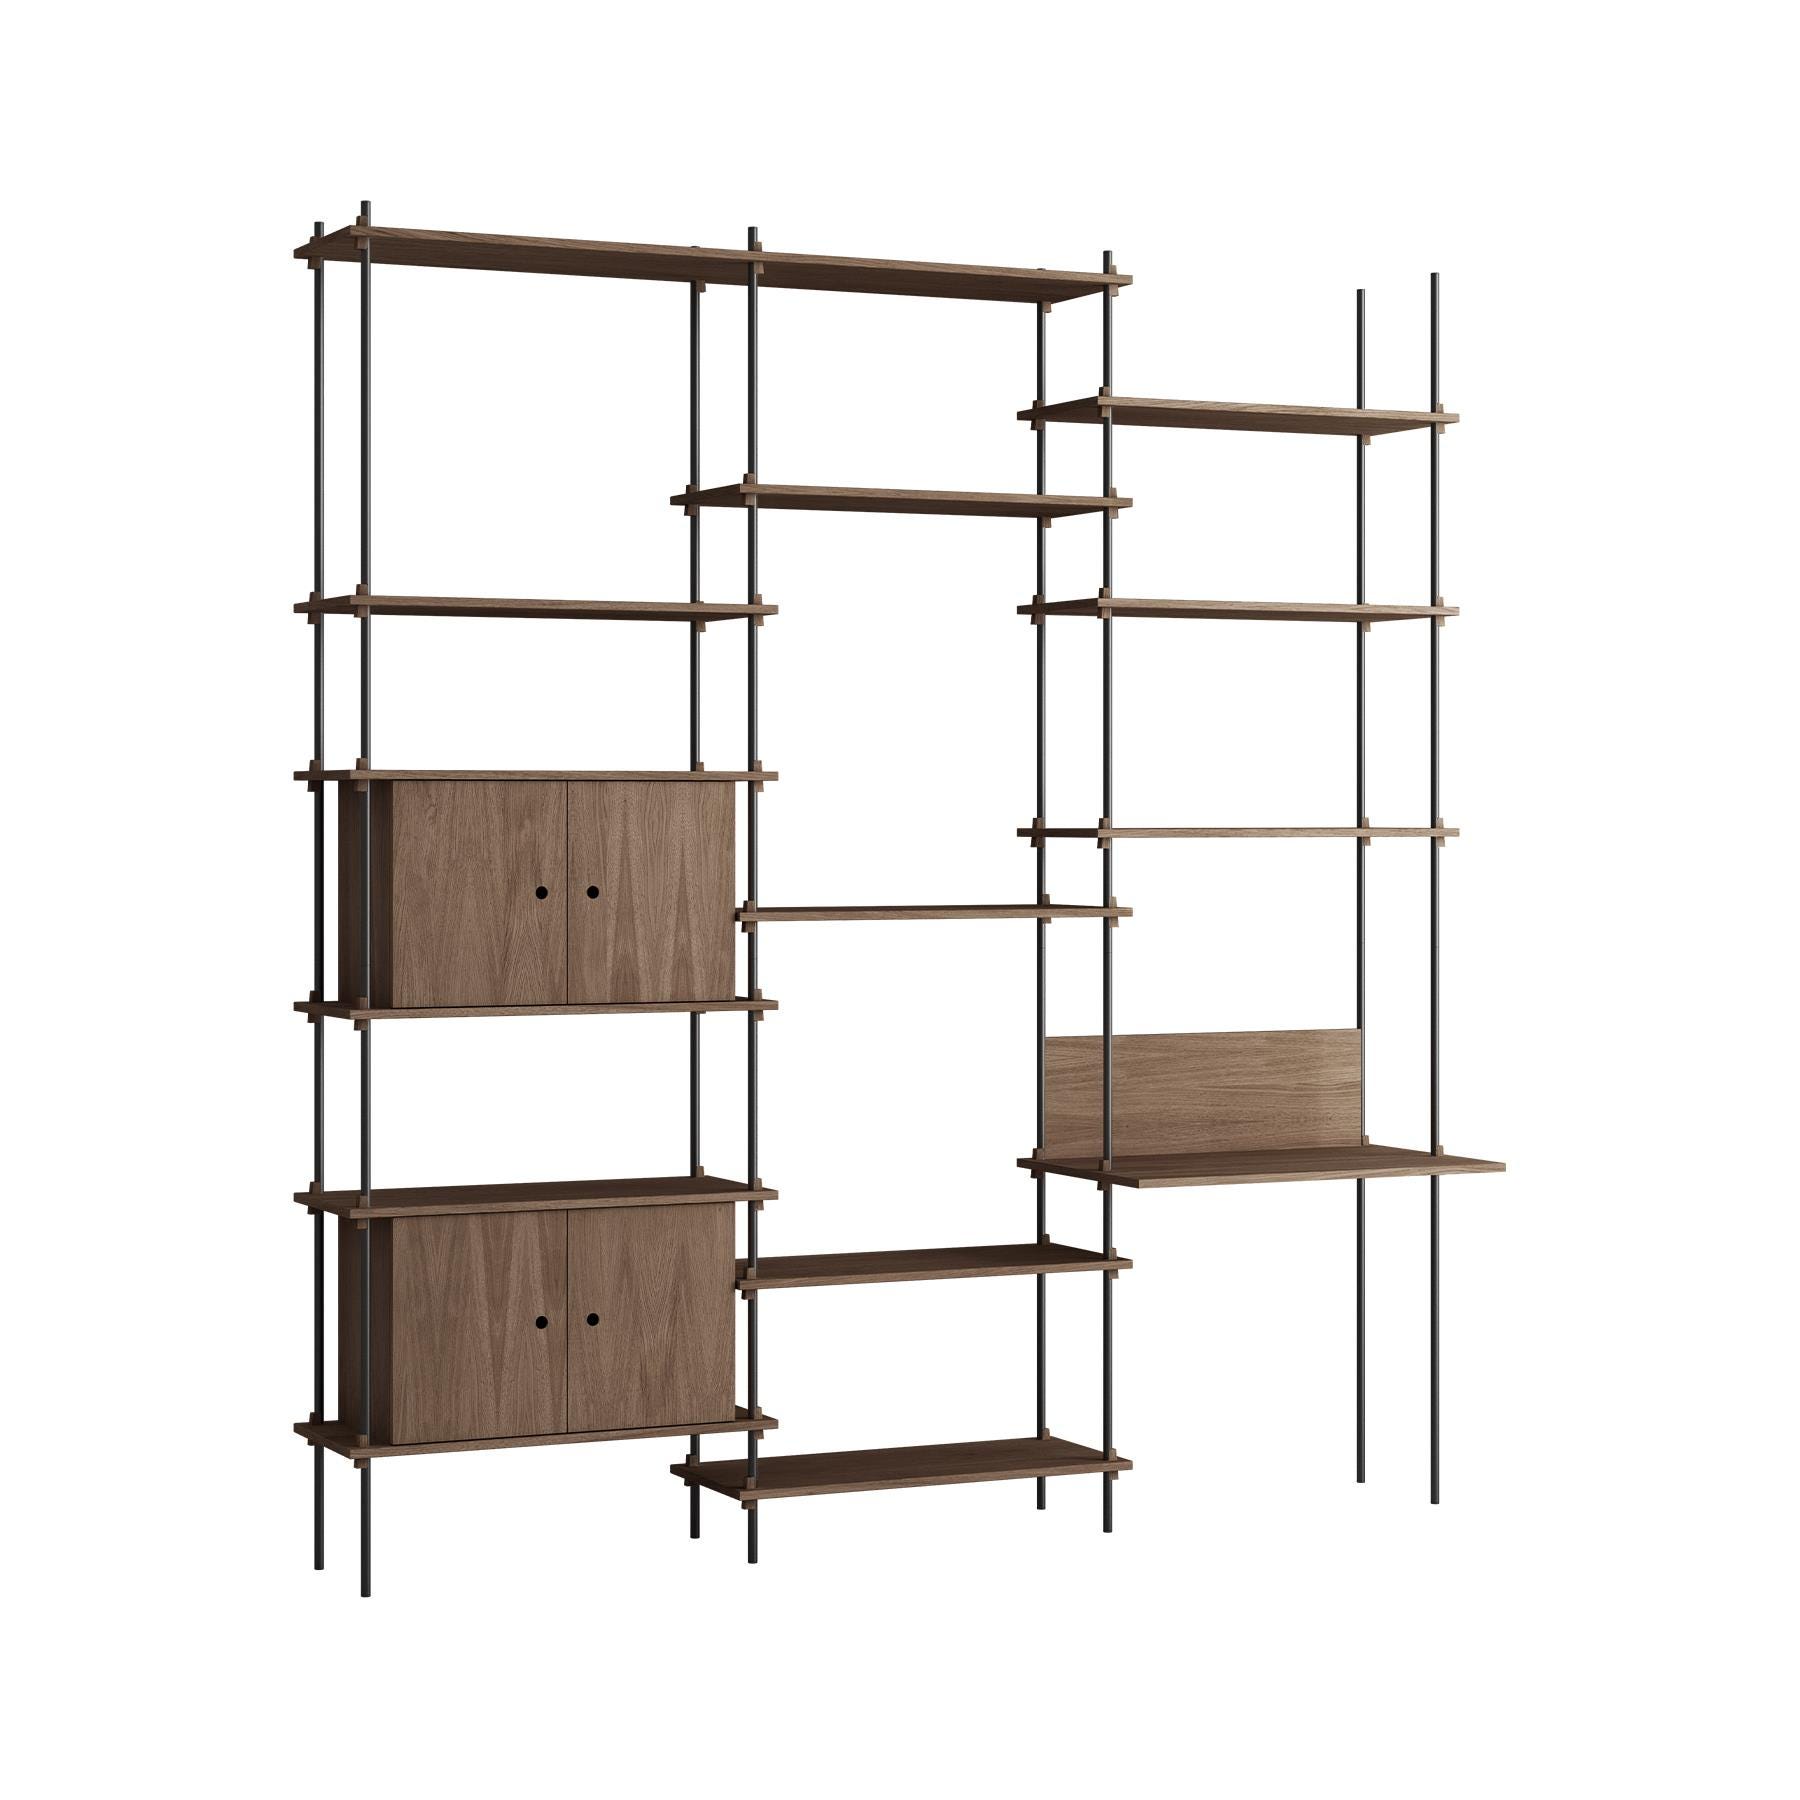 Moebe Triple Shelving System 2 Cabinets And Desk Smoked Oak Black Dark Wood Designer Furniture From Holloways Of Ludlow